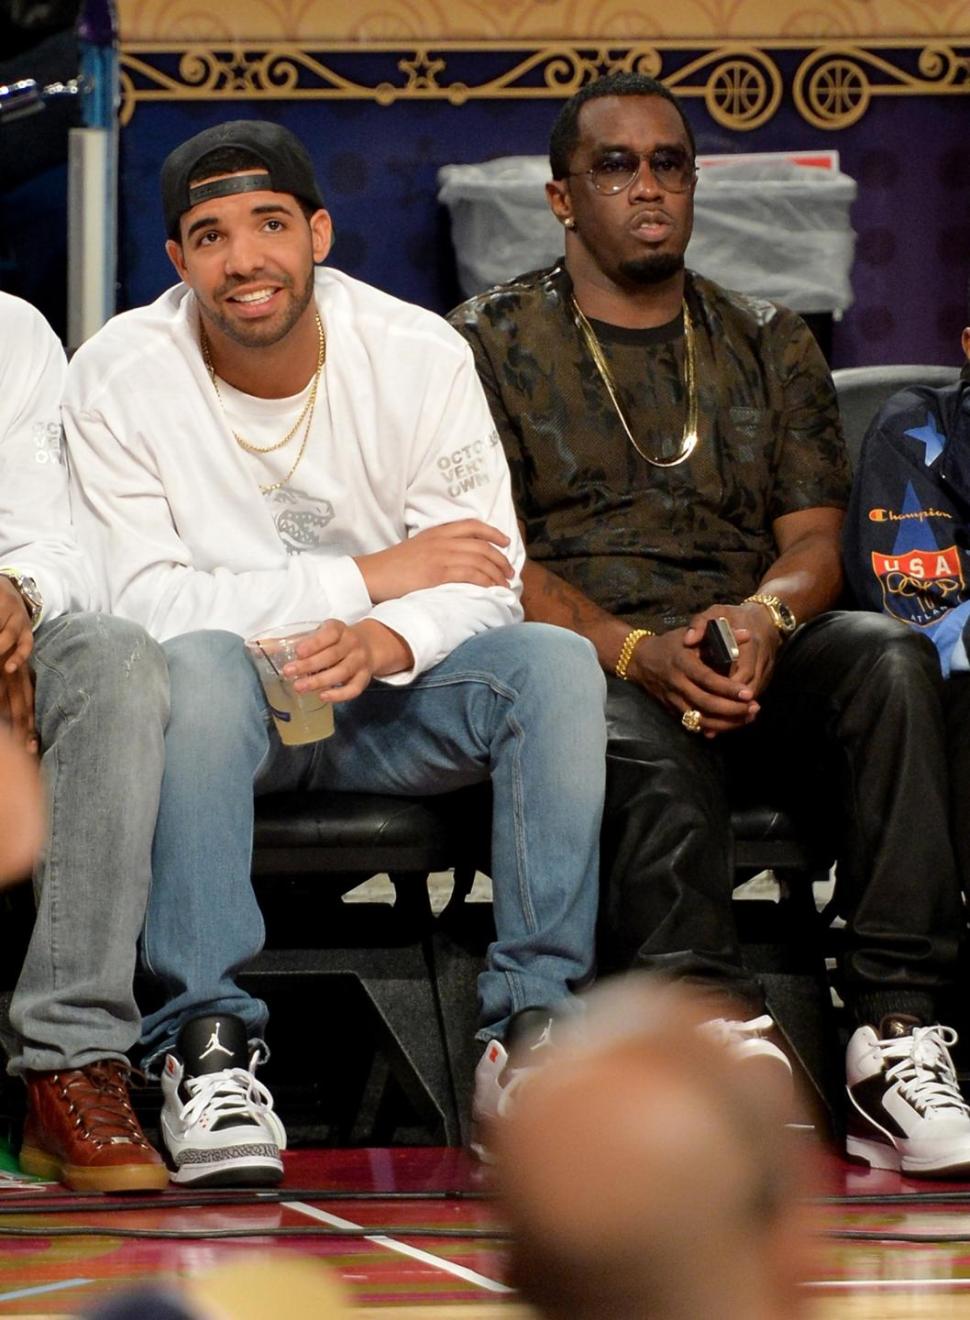 Drake (L) and mogul Sean (Diddy) Combs are reportedly at odds after a brawl broke out early Monday over a snide comment by Drake.